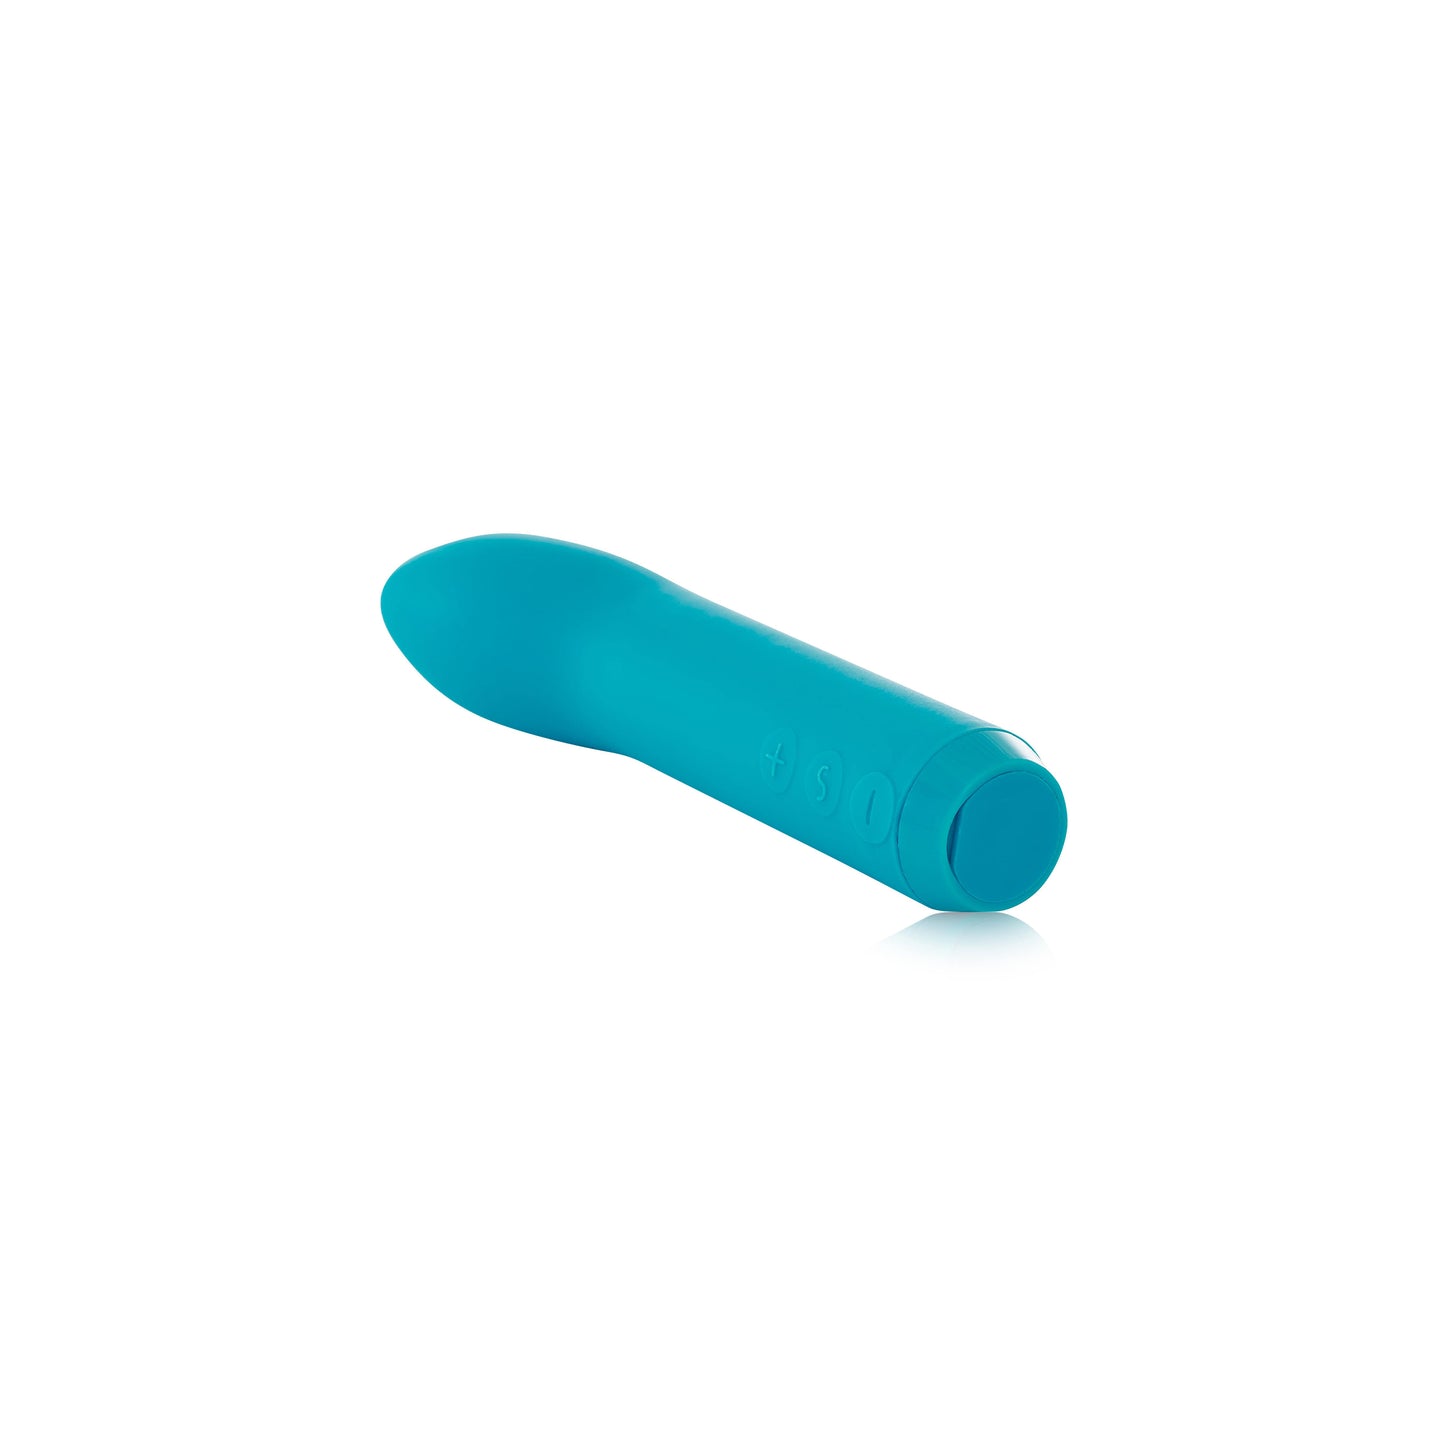 G Spot Bullet Vibrator in teal side view 